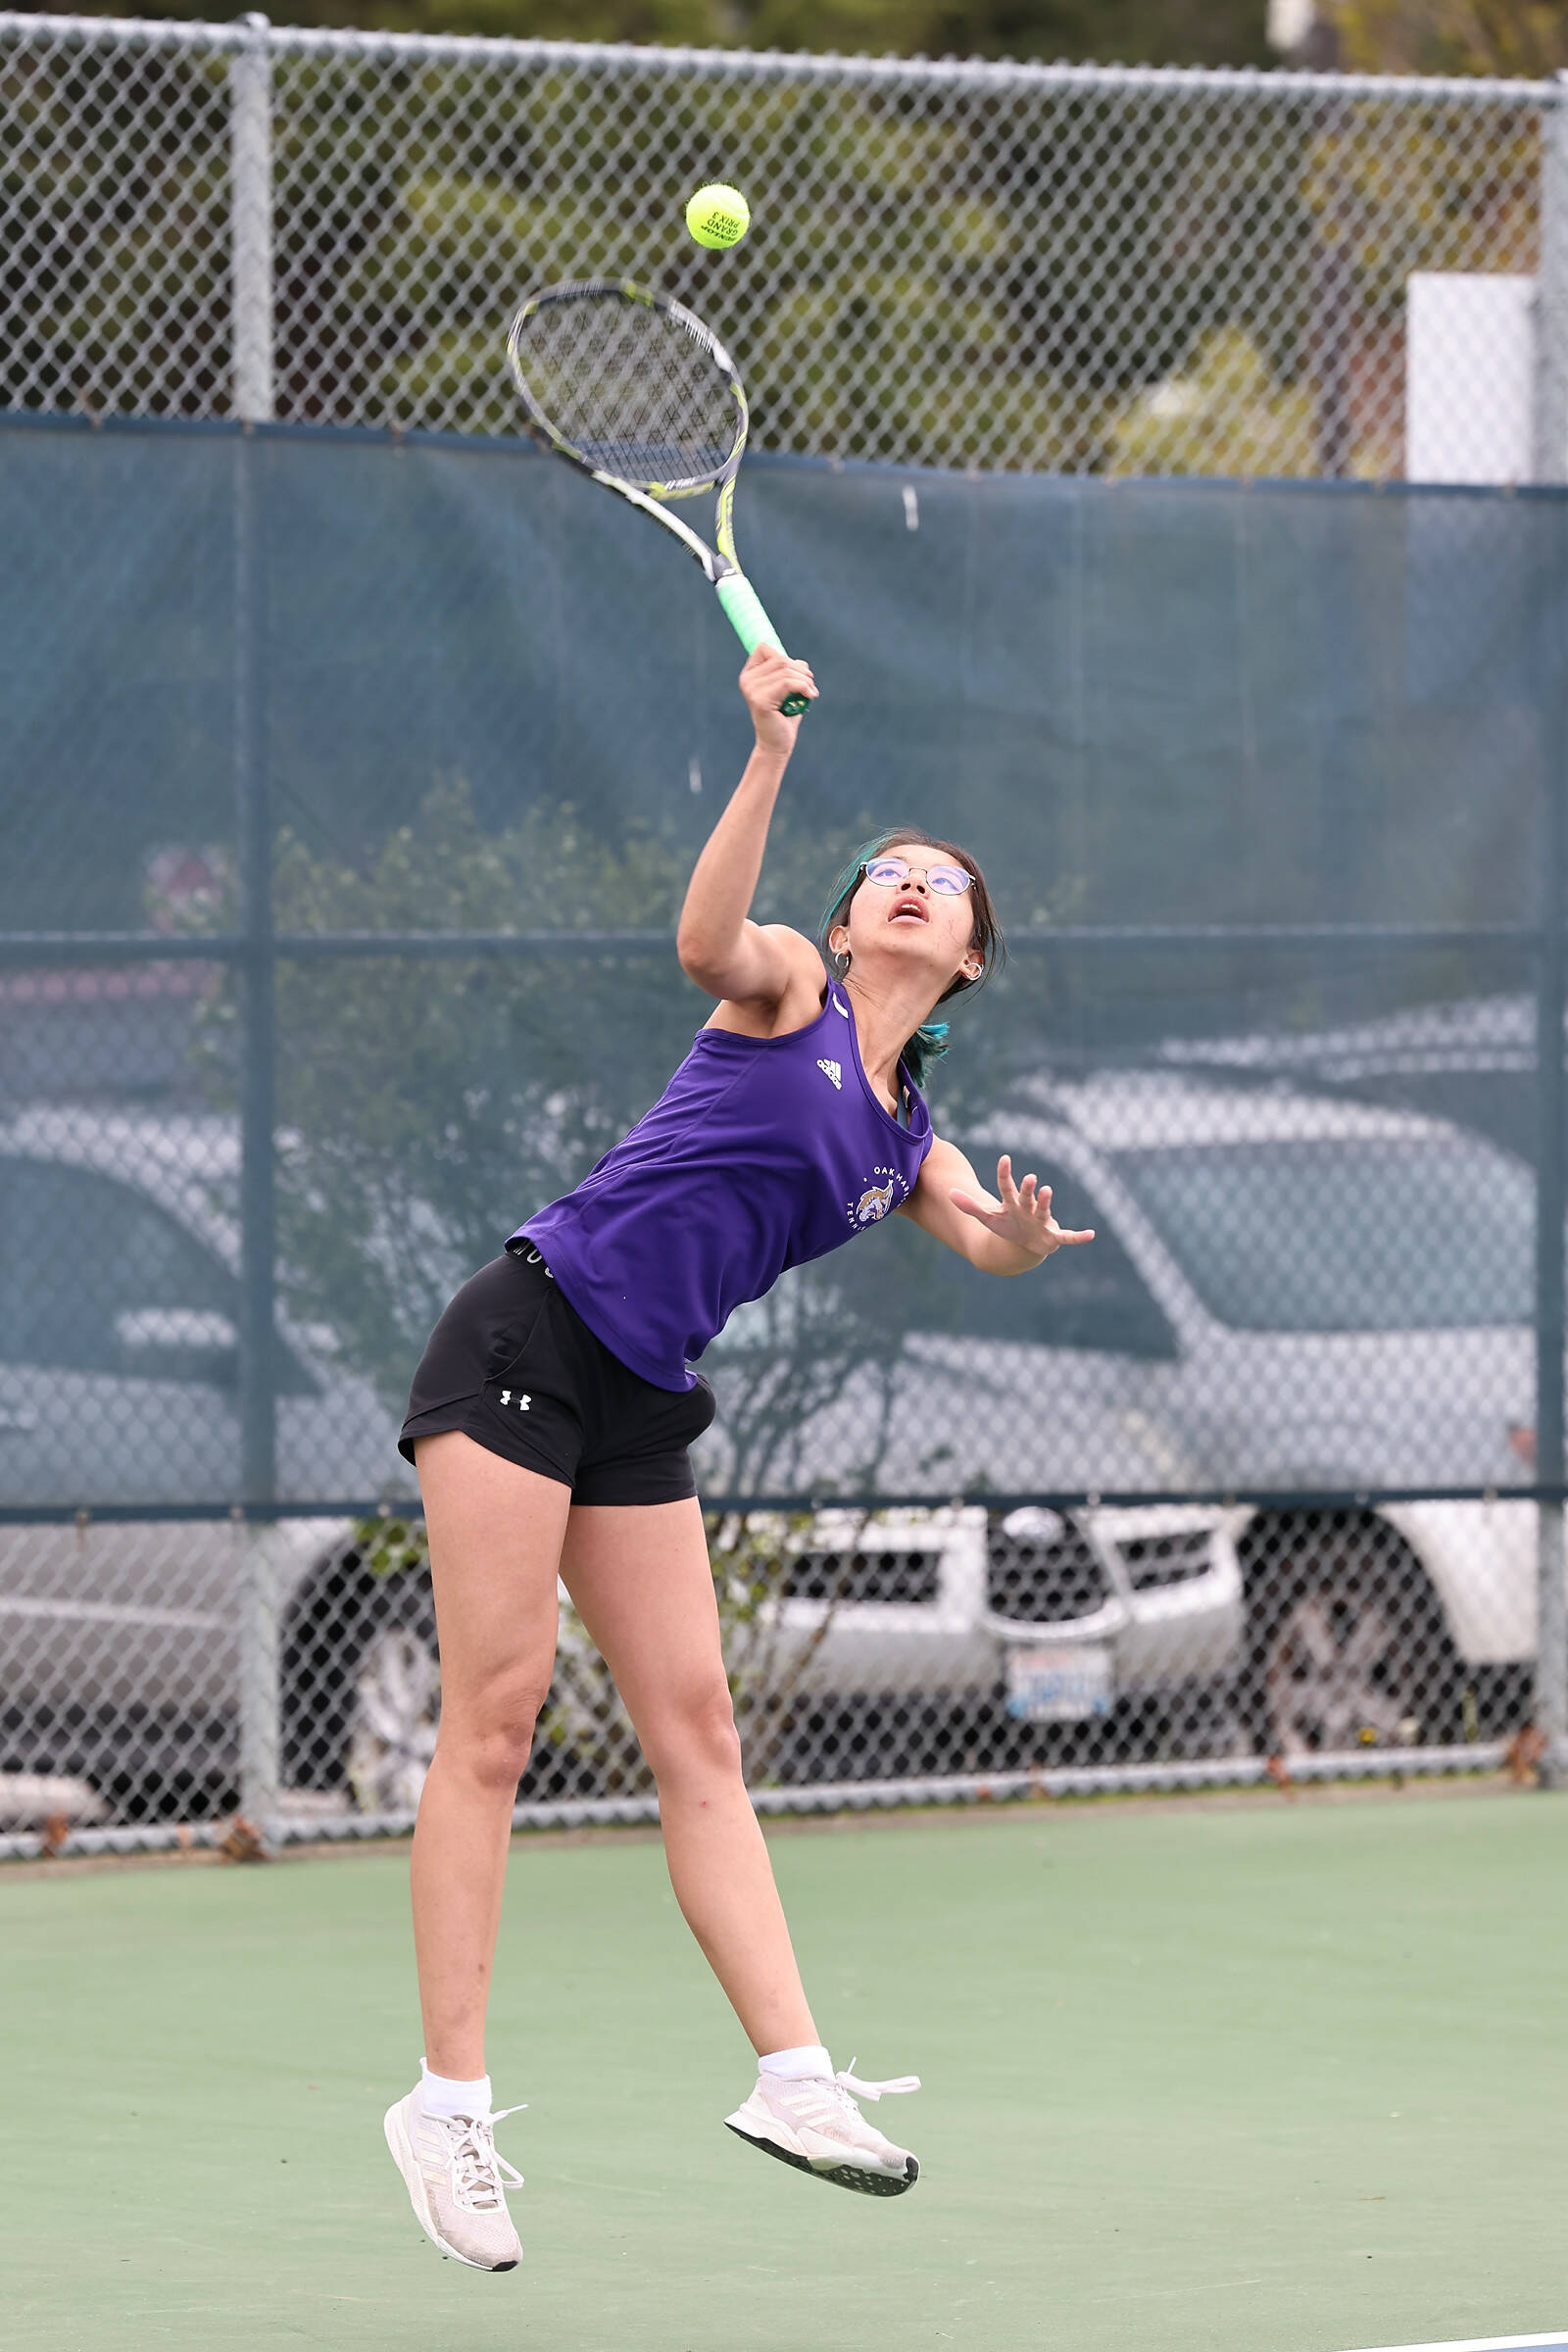 Oak Harbor athlete Brooklyn Ballantyne won third singles 6-1, 6-0 against Anacortes May 1. The Wildcats lost the match 3-4. (Photo by John Fisken)